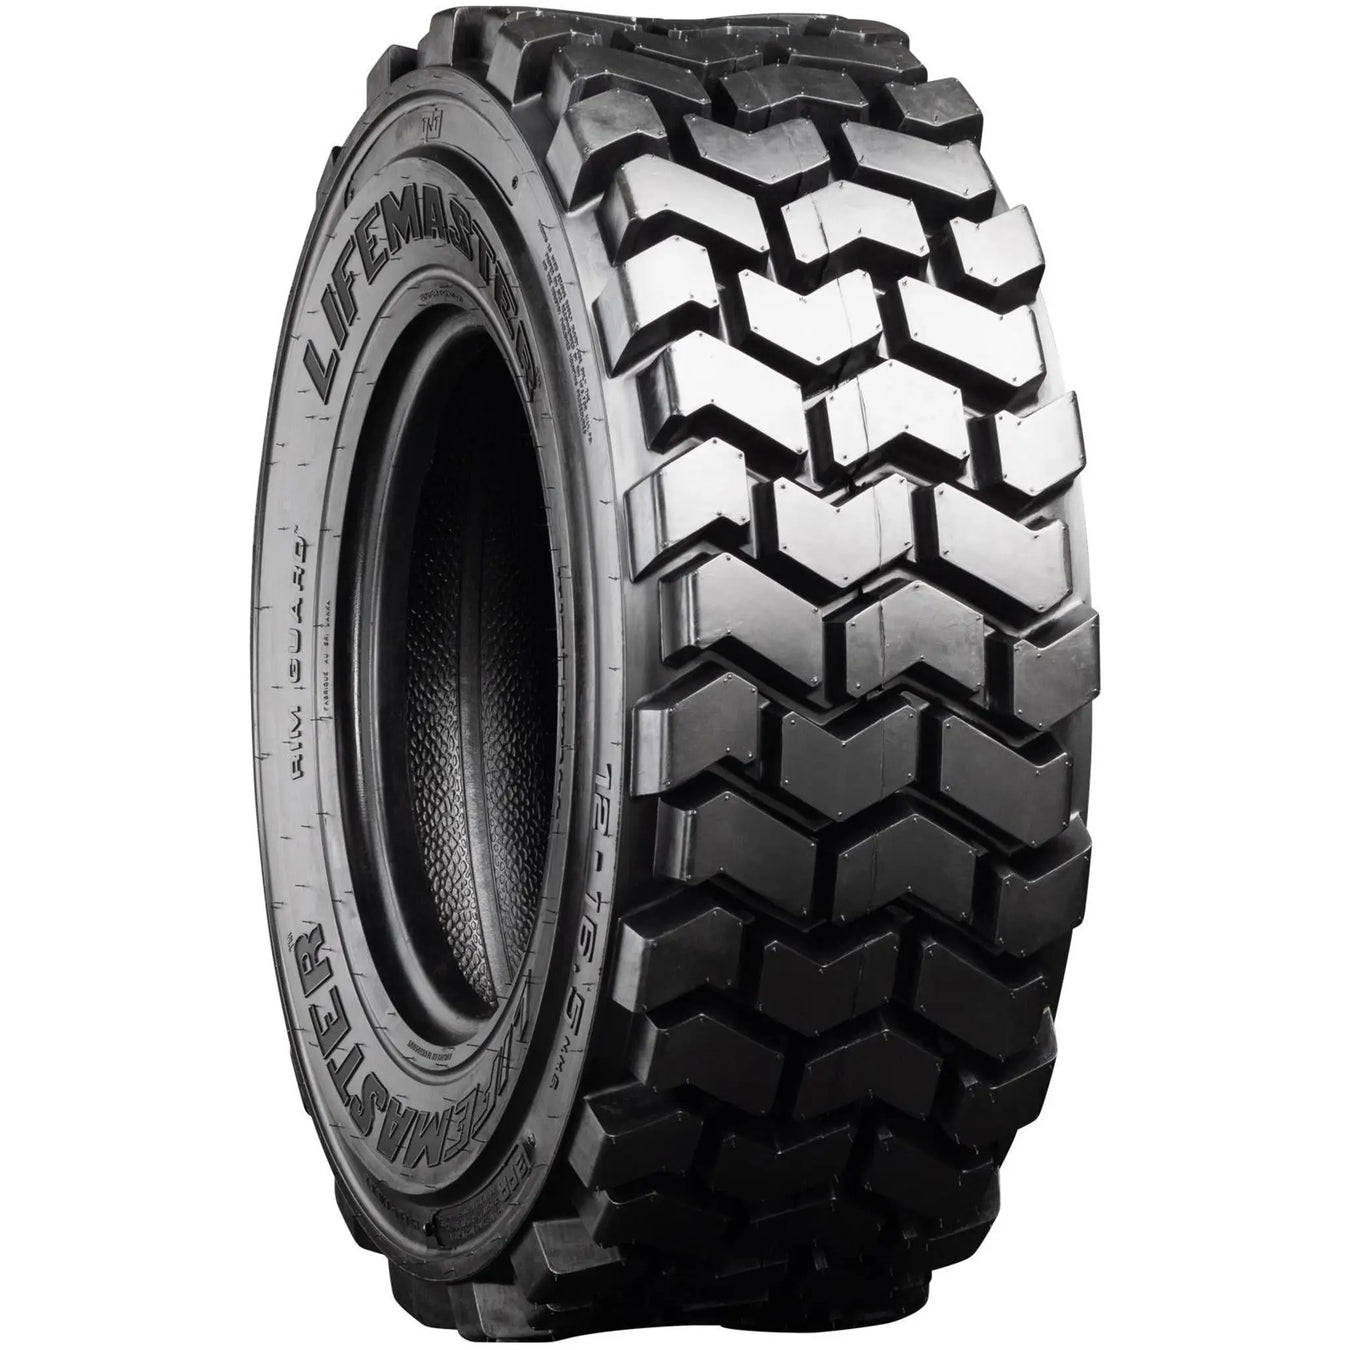 Skid Steer Tires - Pneumatic Tire Size - 12-16.5